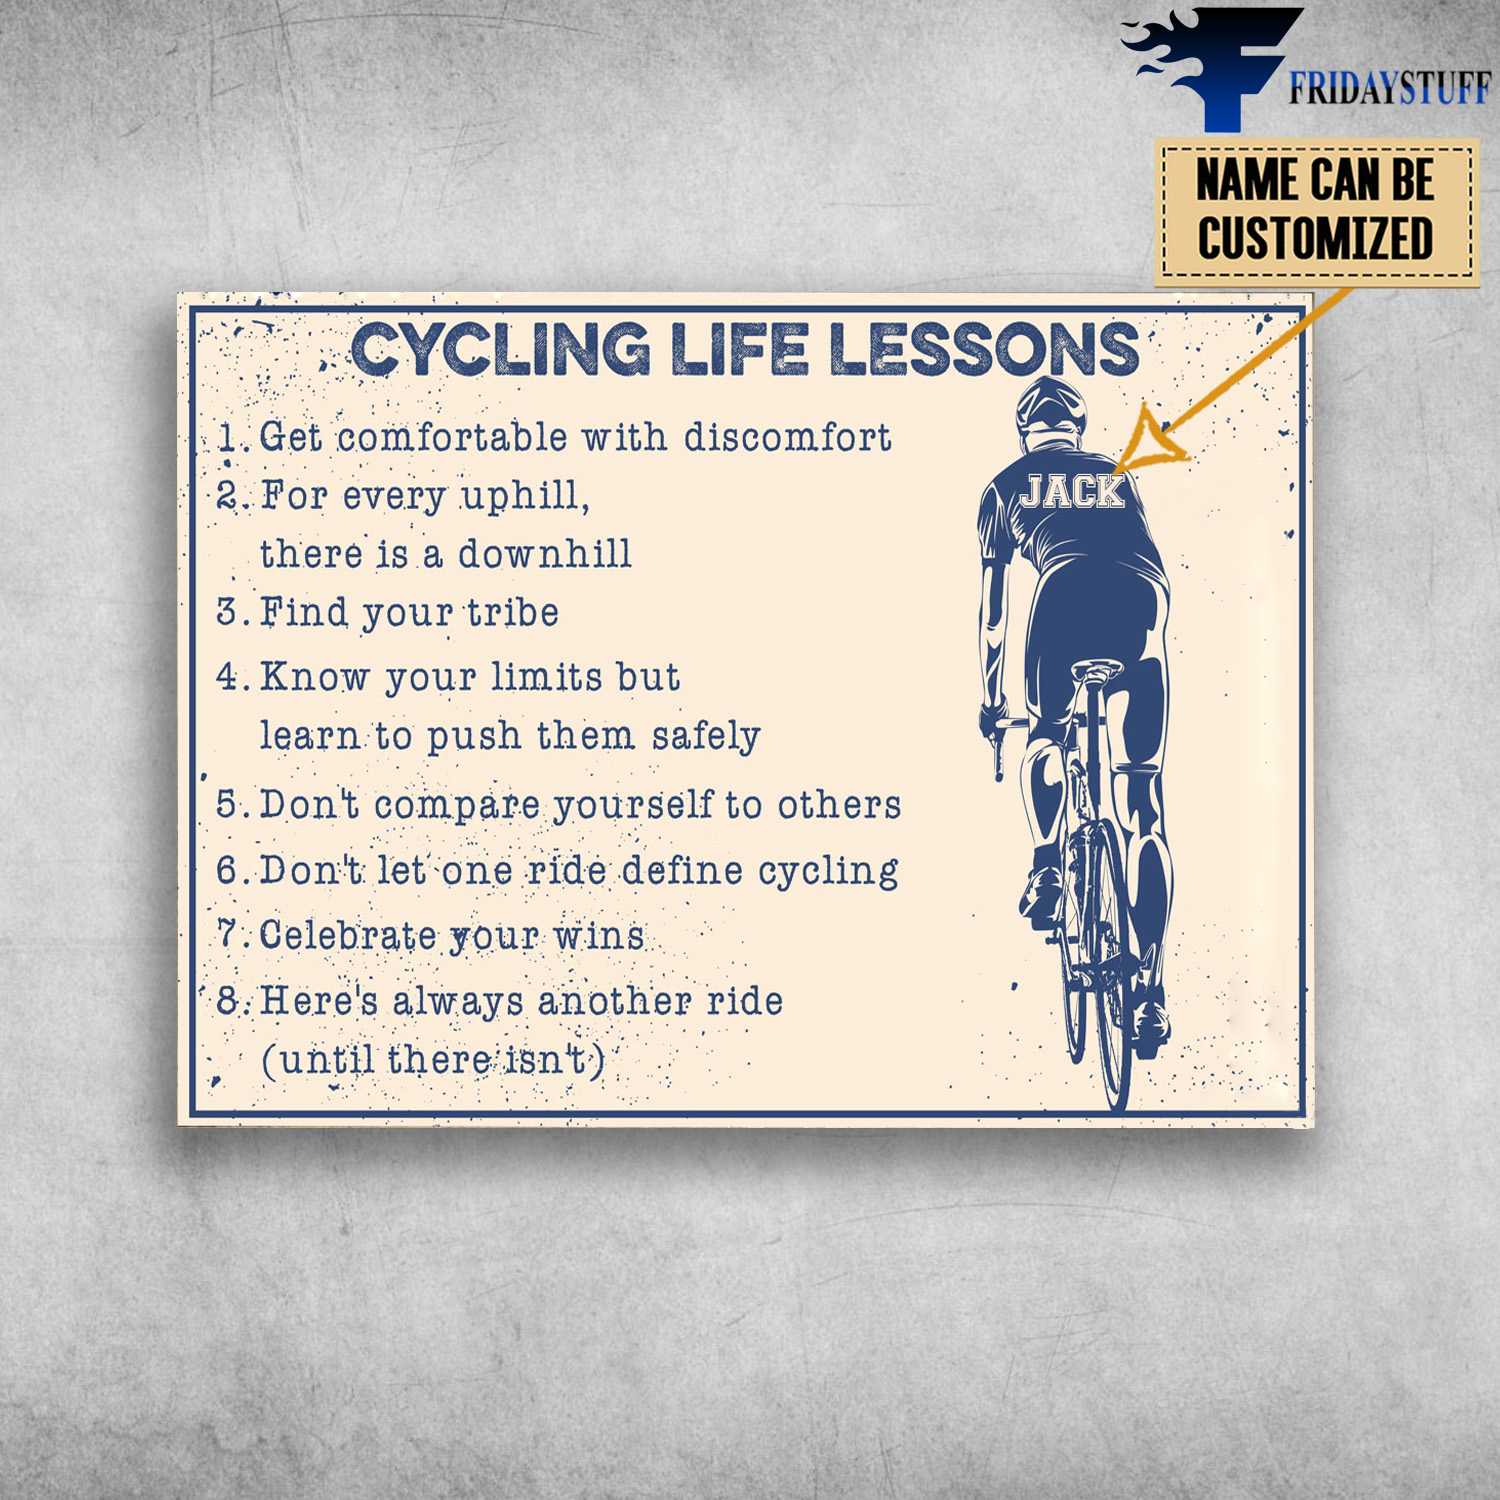 Cycling Life Lessons, Get Comfortable With Discomfort, For Every Uphill There Is A Downhill, Find Your Tribe, Know Your Limits But, Learn To Push Them Safely